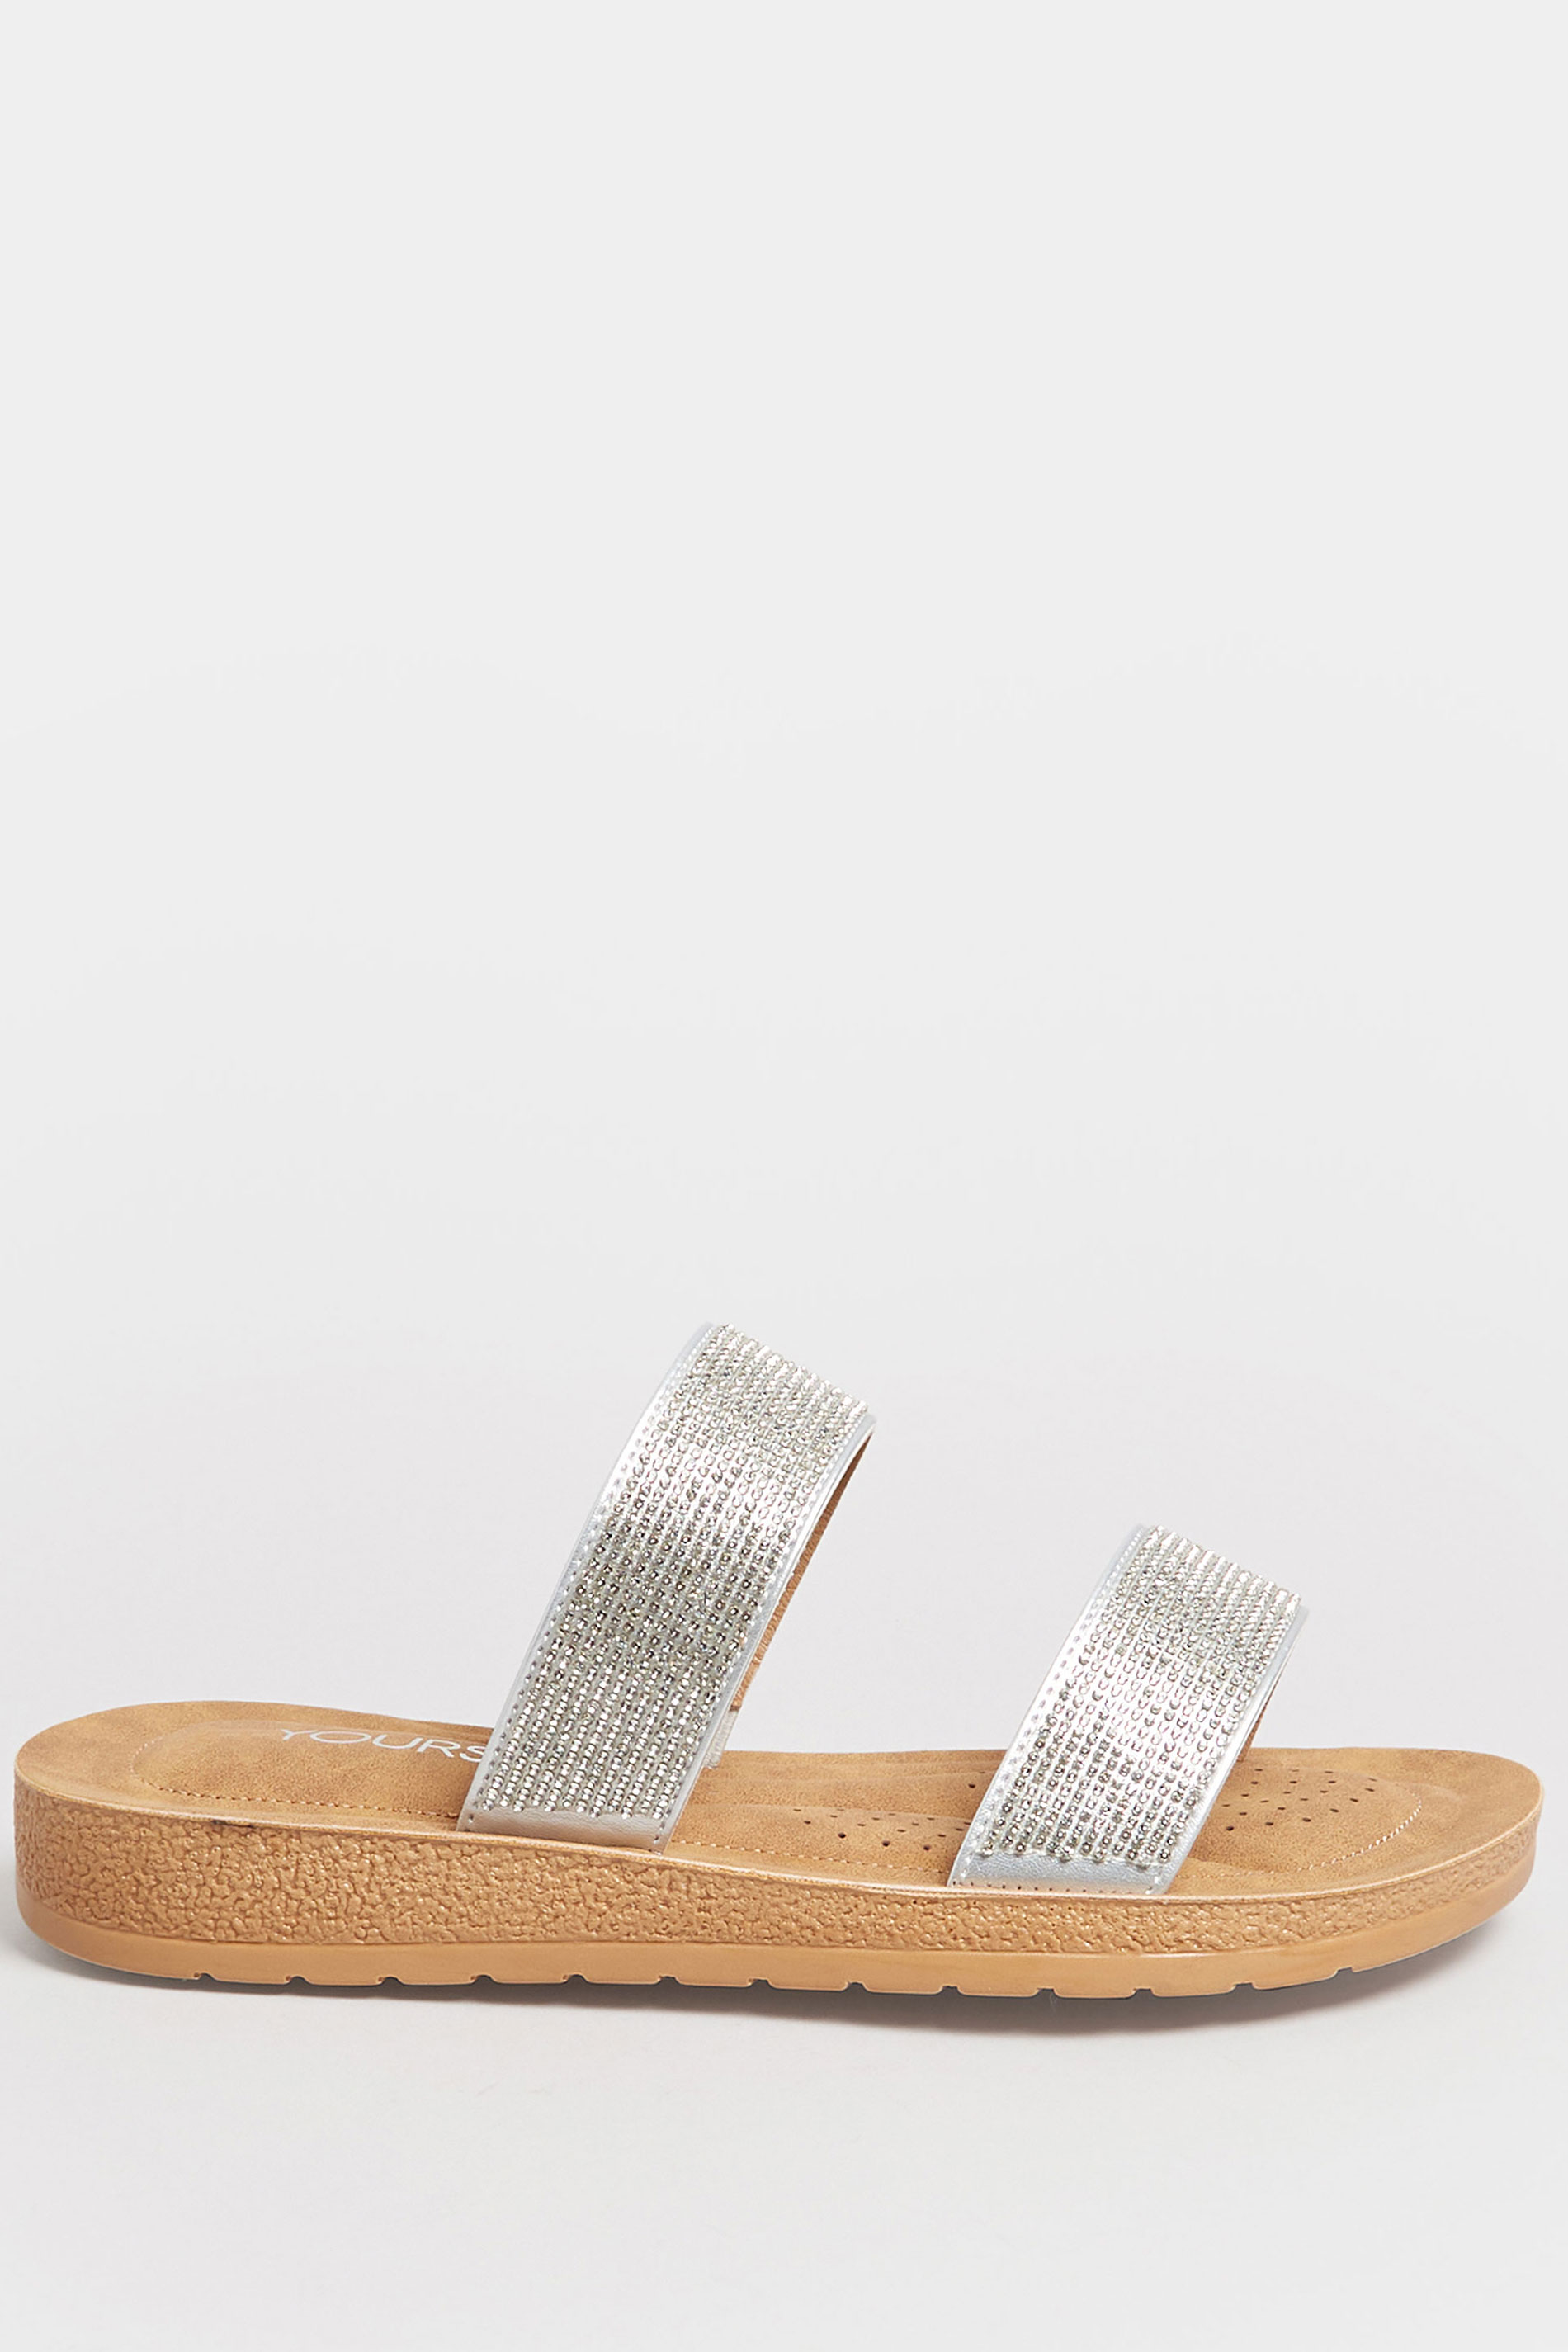 Silver & Brown Glitter Strap Mule Sandals In Extra Wide EEE Fit | Yours Clothing  3